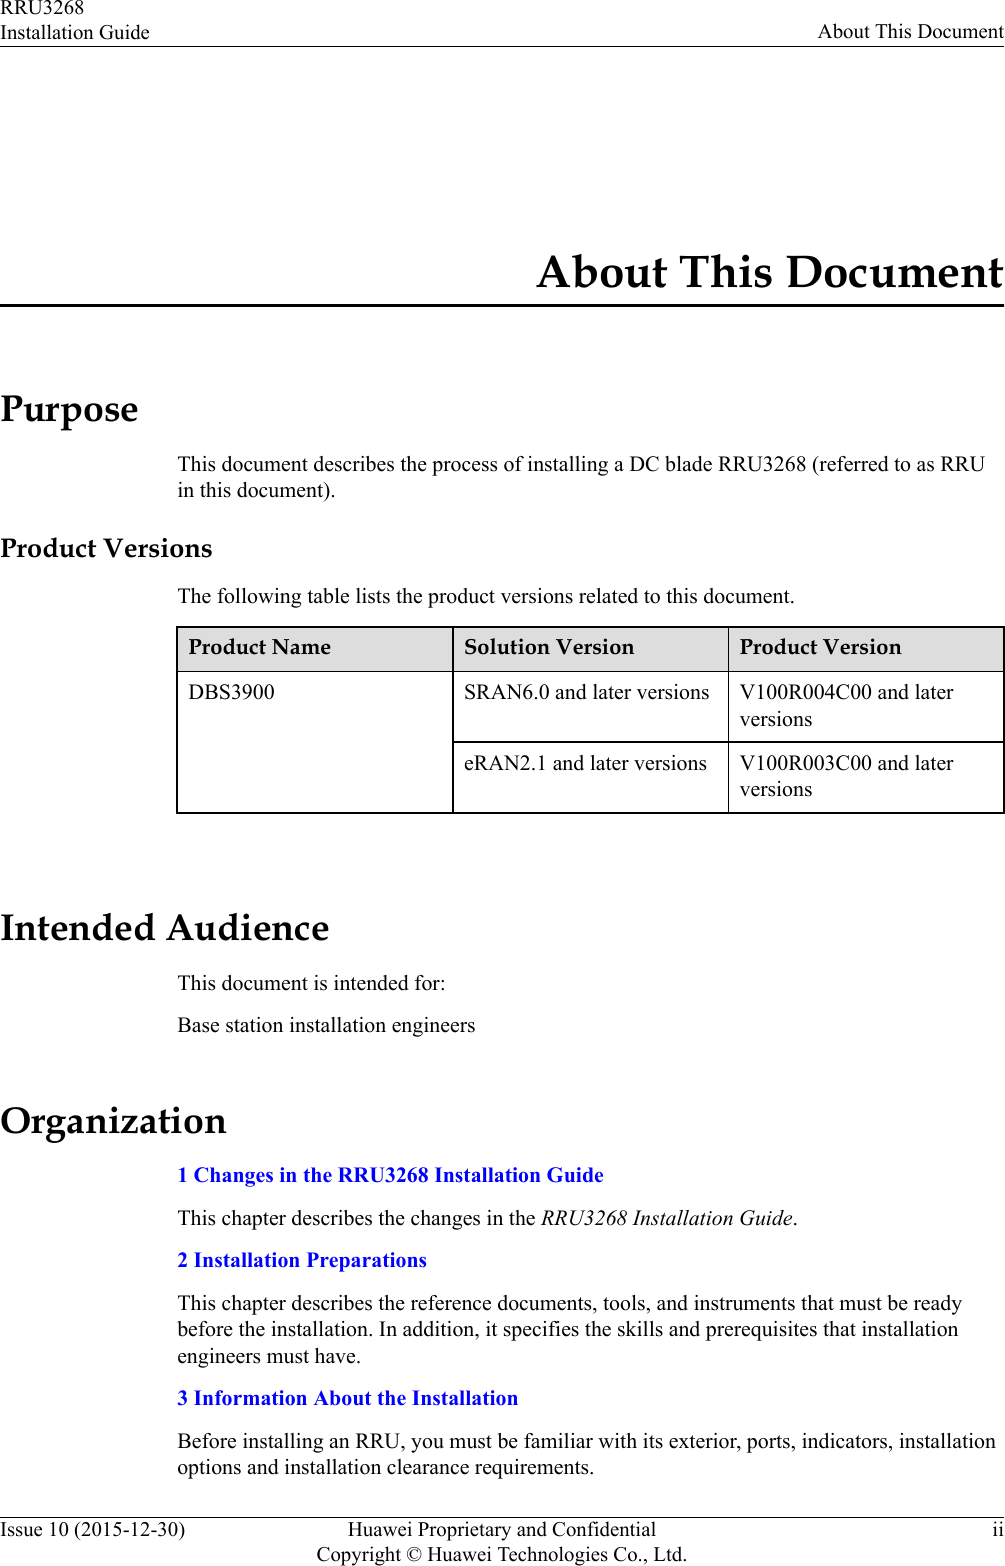 About This DocumentPurposeThis document describes the process of installing a DC blade RRU3268 (referred to as RRUin this document).Product VersionsThe following table lists the product versions related to this document.Product Name Solution Version Product VersionDBS3900 SRAN6.0 and later versions V100R004C00 and laterversionseRAN2.1 and later versions V100R003C00 and laterversions Intended AudienceThis document is intended for:Base station installation engineersOrganization1 Changes in the RRU3268 Installation GuideThis chapter describes the changes in the RRU3268 Installation Guide.2 Installation PreparationsThis chapter describes the reference documents, tools, and instruments that must be readybefore the installation. In addition, it specifies the skills and prerequisites that installationengineers must have.3 Information About the InstallationBefore installing an RRU, you must be familiar with its exterior, ports, indicators, installationoptions and installation clearance requirements.RRU3268Installation Guide About This DocumentIssue 10 (2015-12-30) Huawei Proprietary and ConfidentialCopyright © Huawei Technologies Co., Ltd.ii